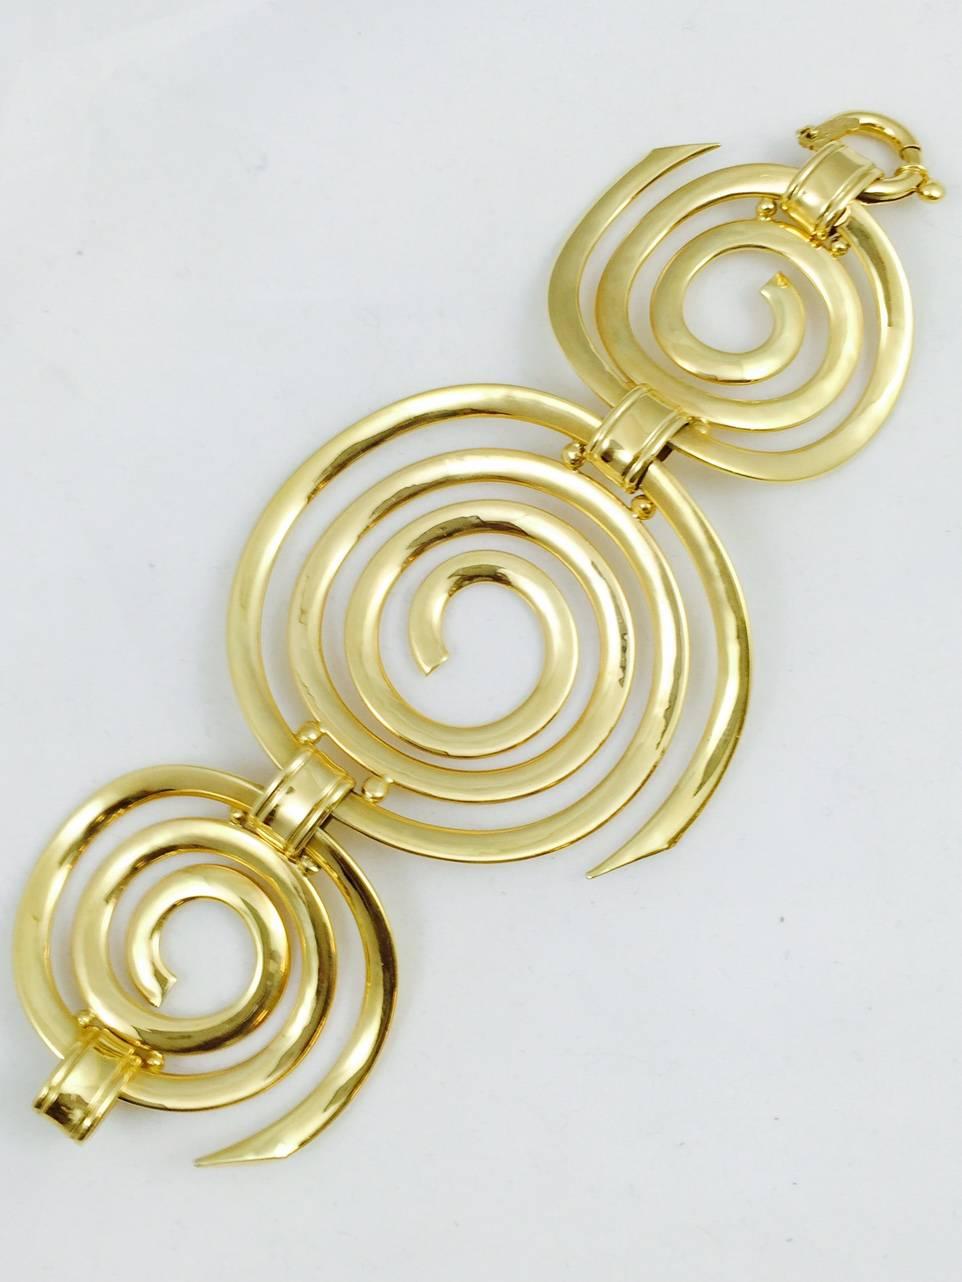 What a stunning bracelet!  Simple yet elegant.  High polished 18 karat yellow gold never goes out of style.  The gift of gold is always well received.  This bold design has 3 curved sections allowing the bracelet to embrace the wrist.  Wear it with